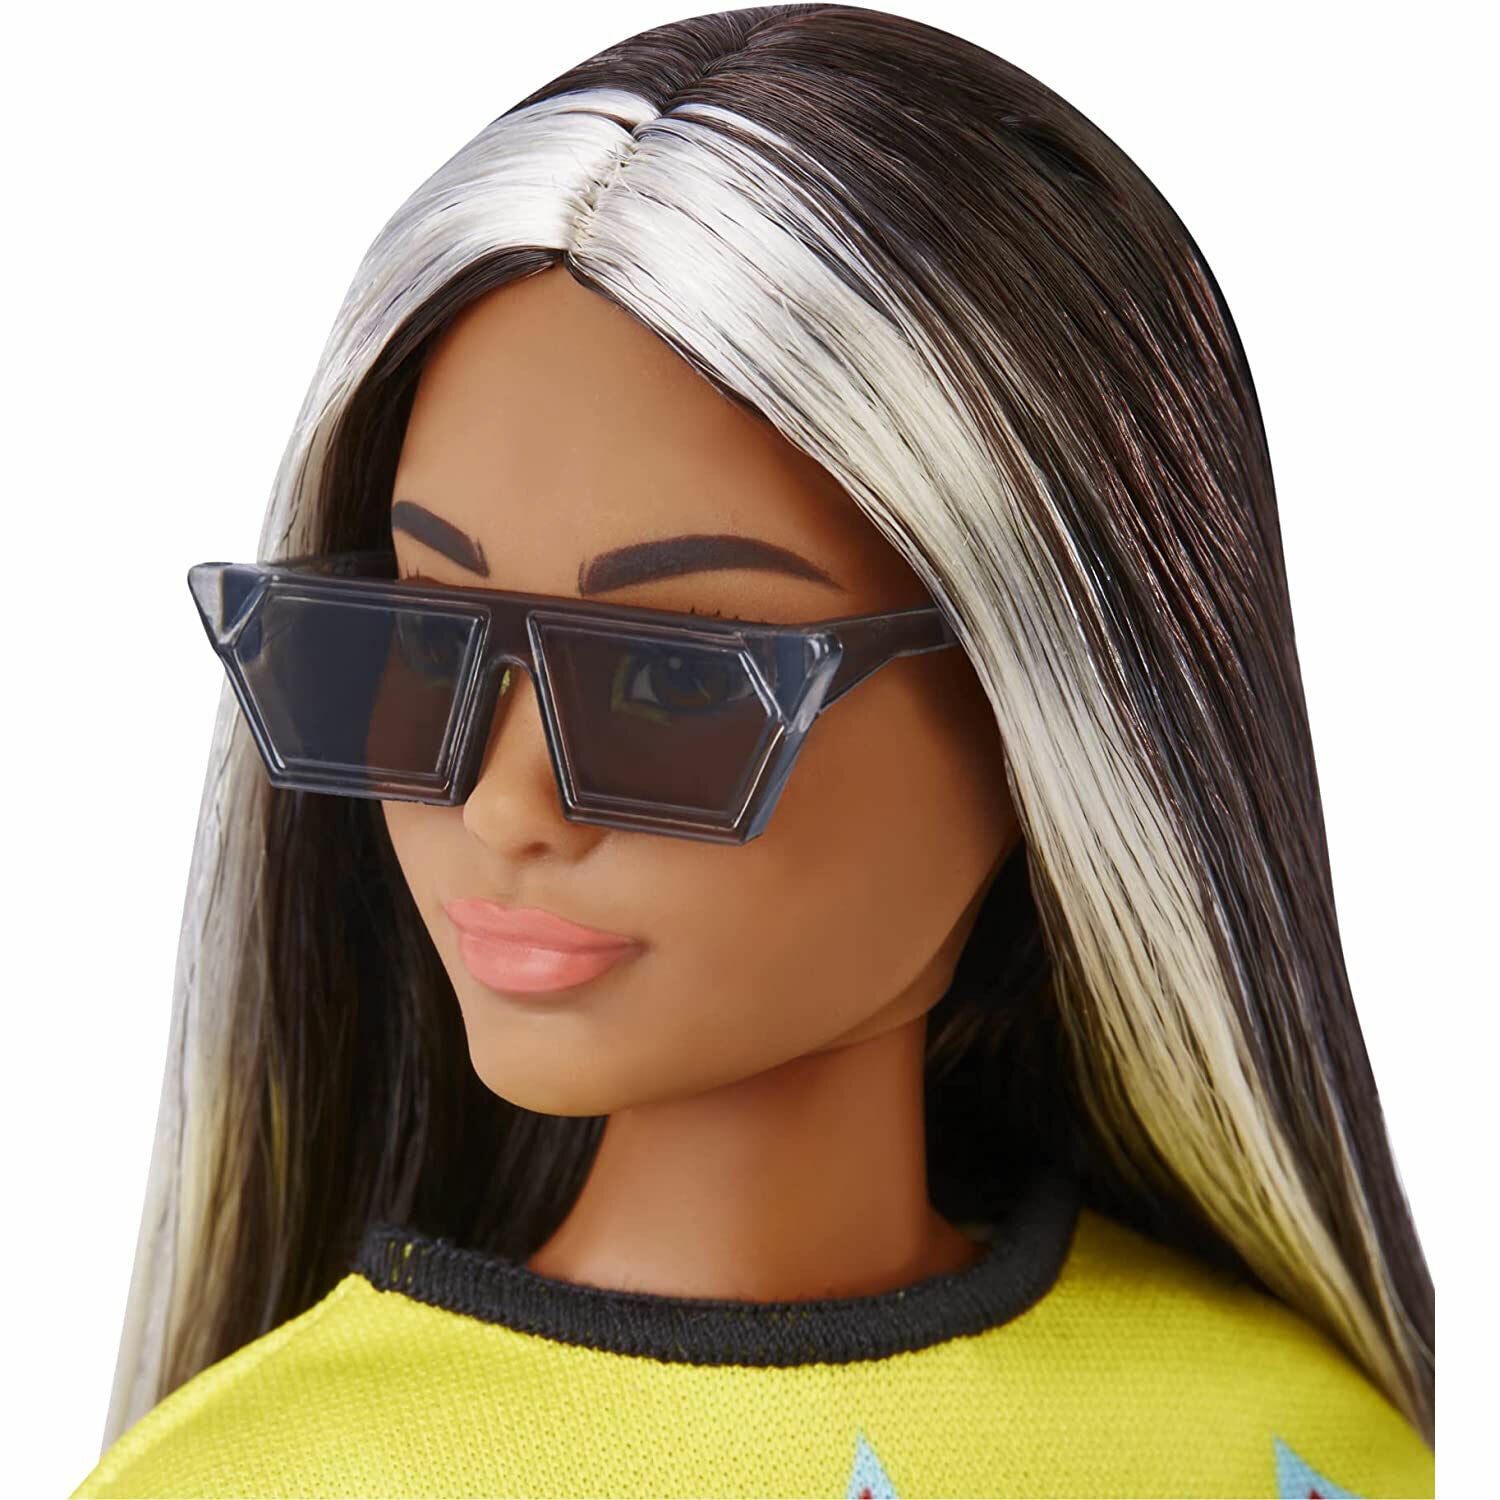 New Barbie Fashionistas Doll #179 with Highlighted Hair & Sunglasses